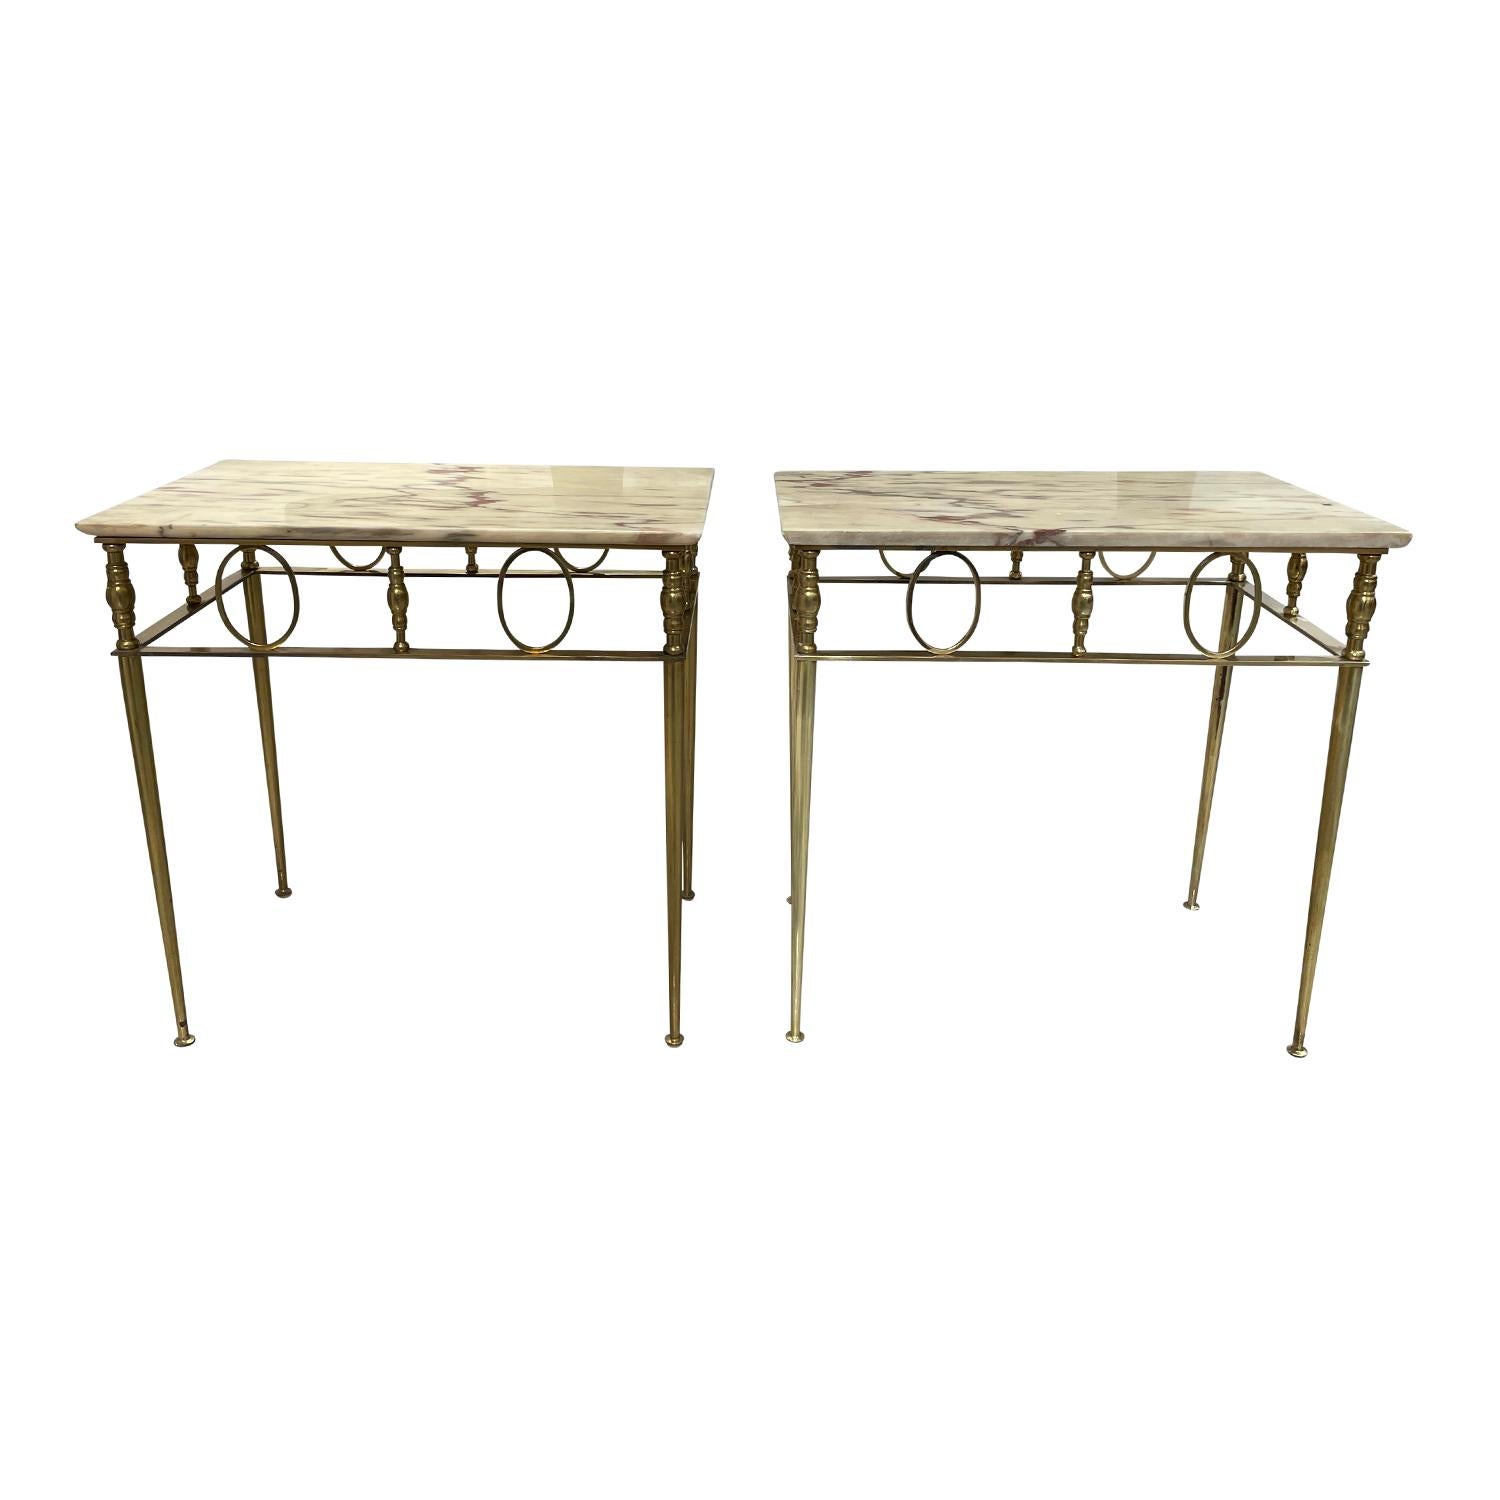 Hand-Crafted 20th Century French Art Deco Pair of Vintage Marble, Brass Side Tables For Sale